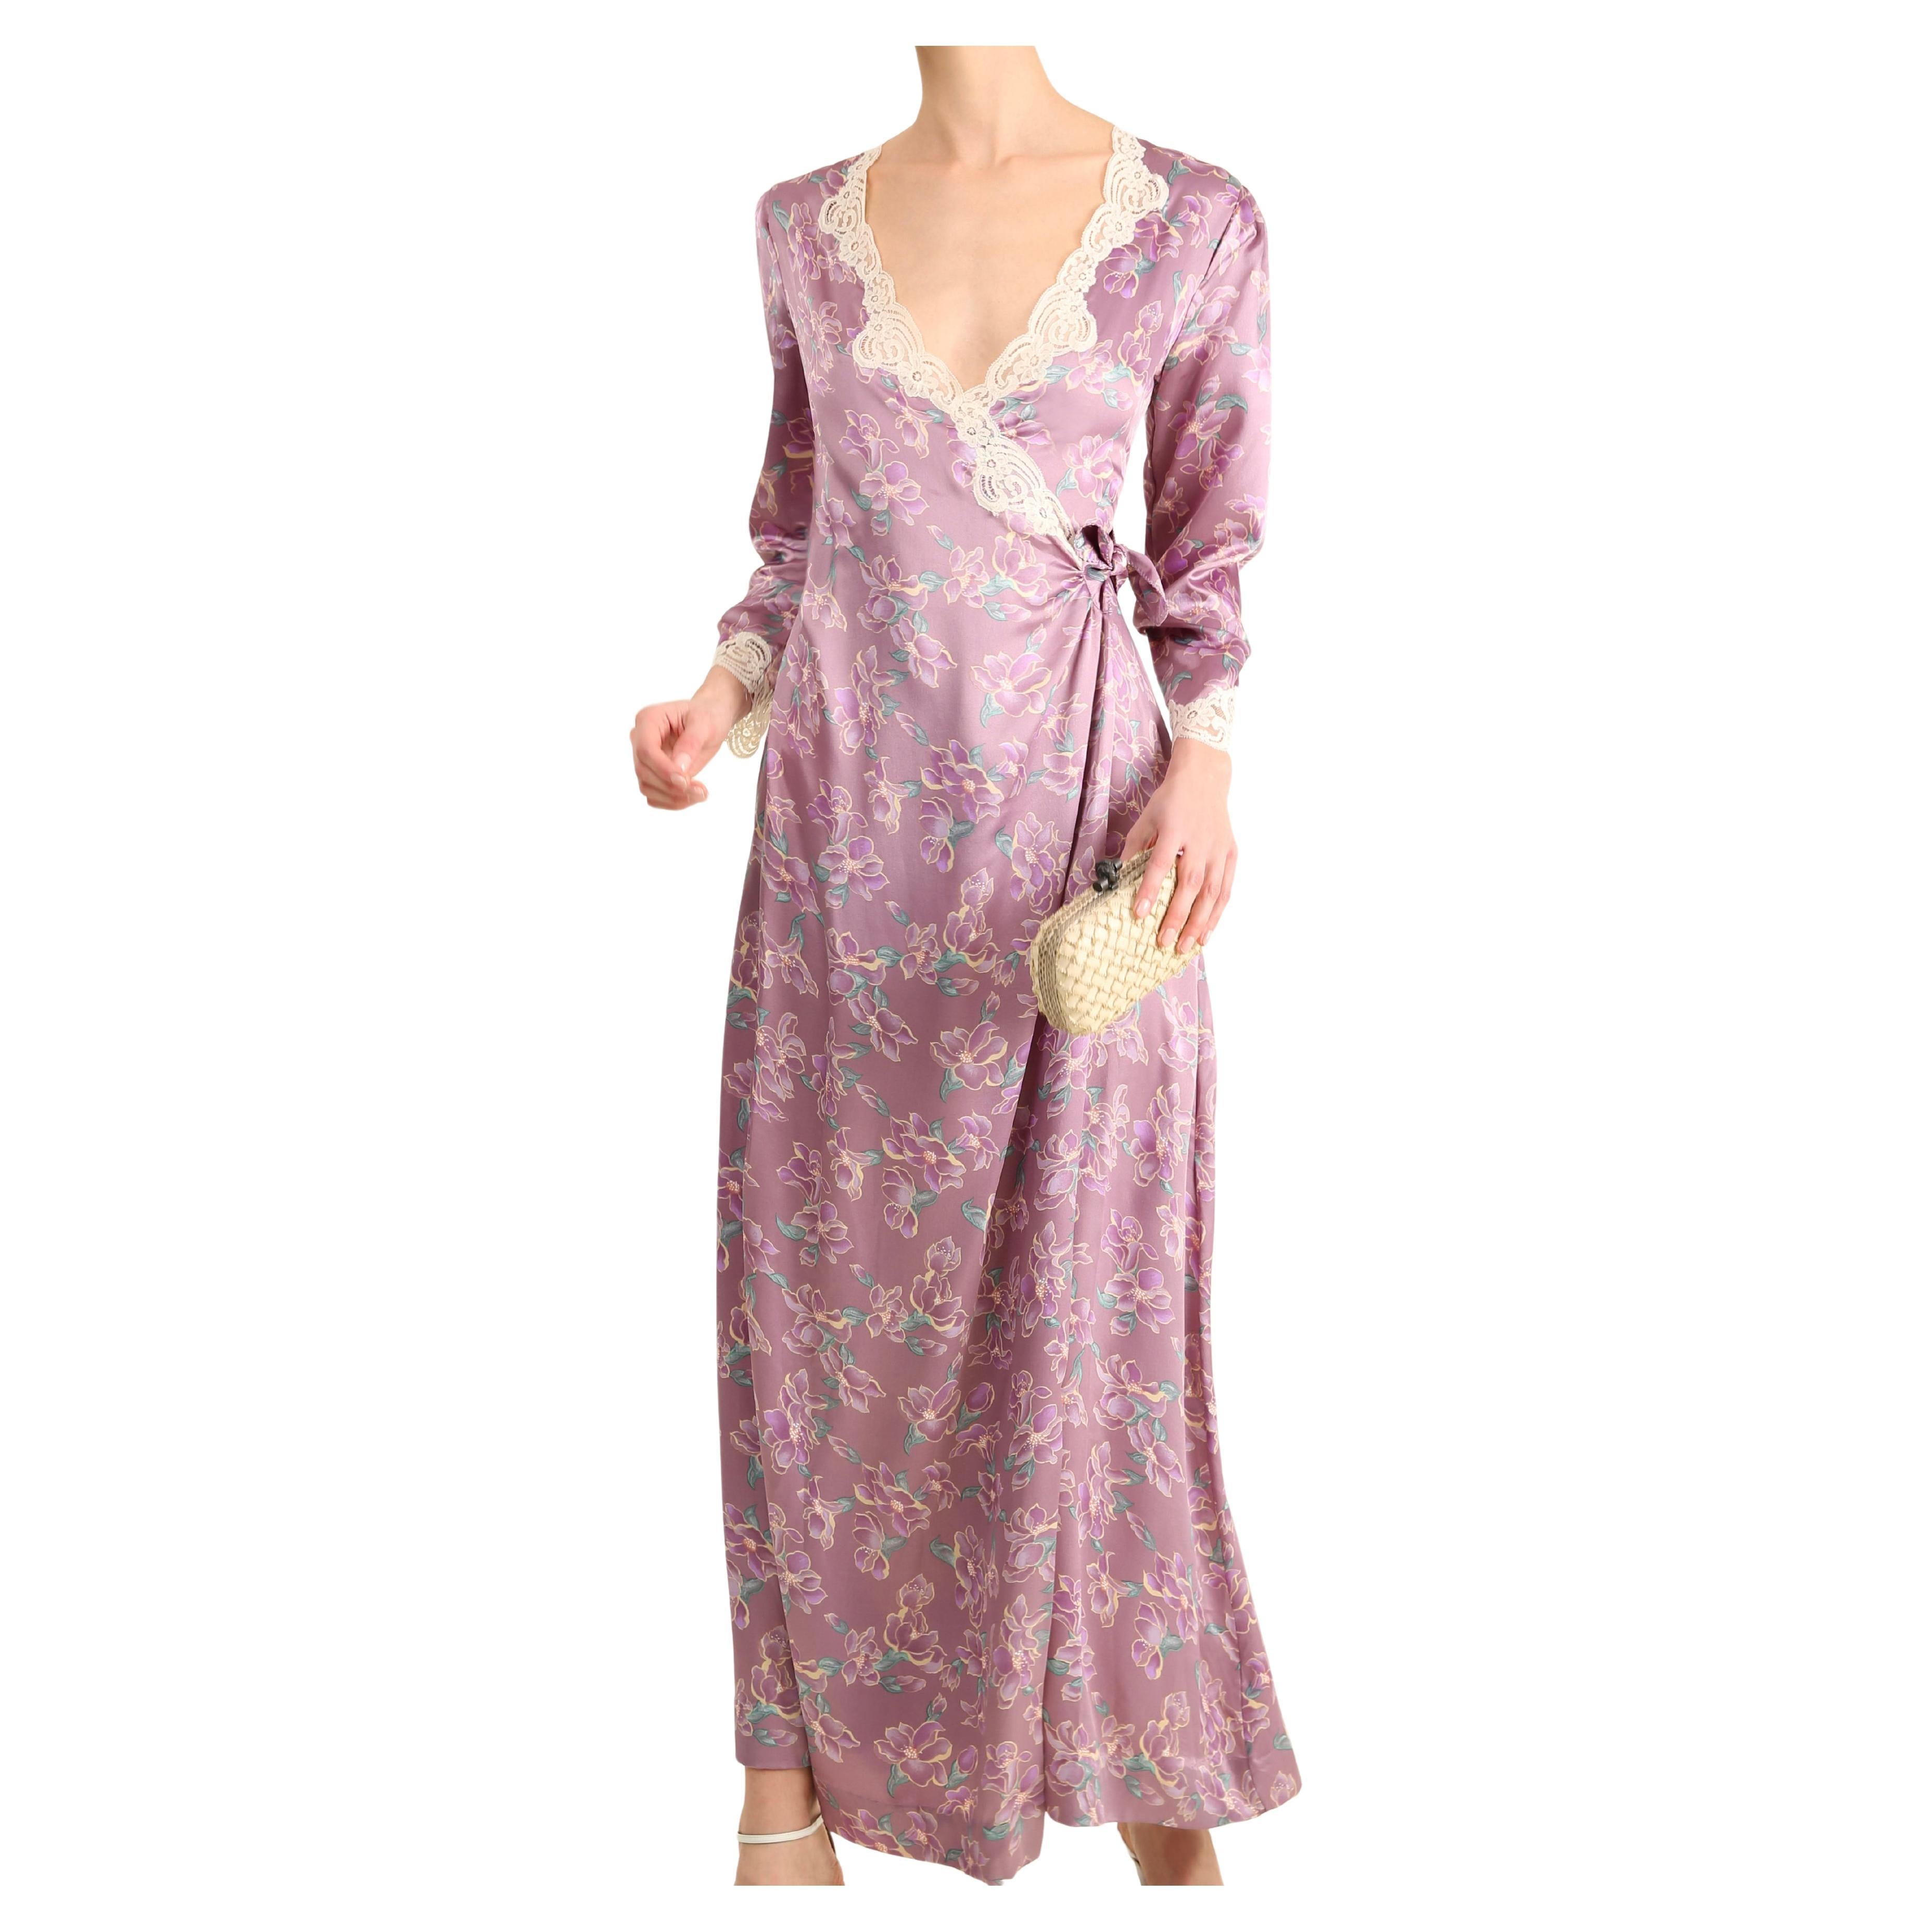 Christian Dior vintage lilac floral ivory lace plunging night robe dress gown S For Sale